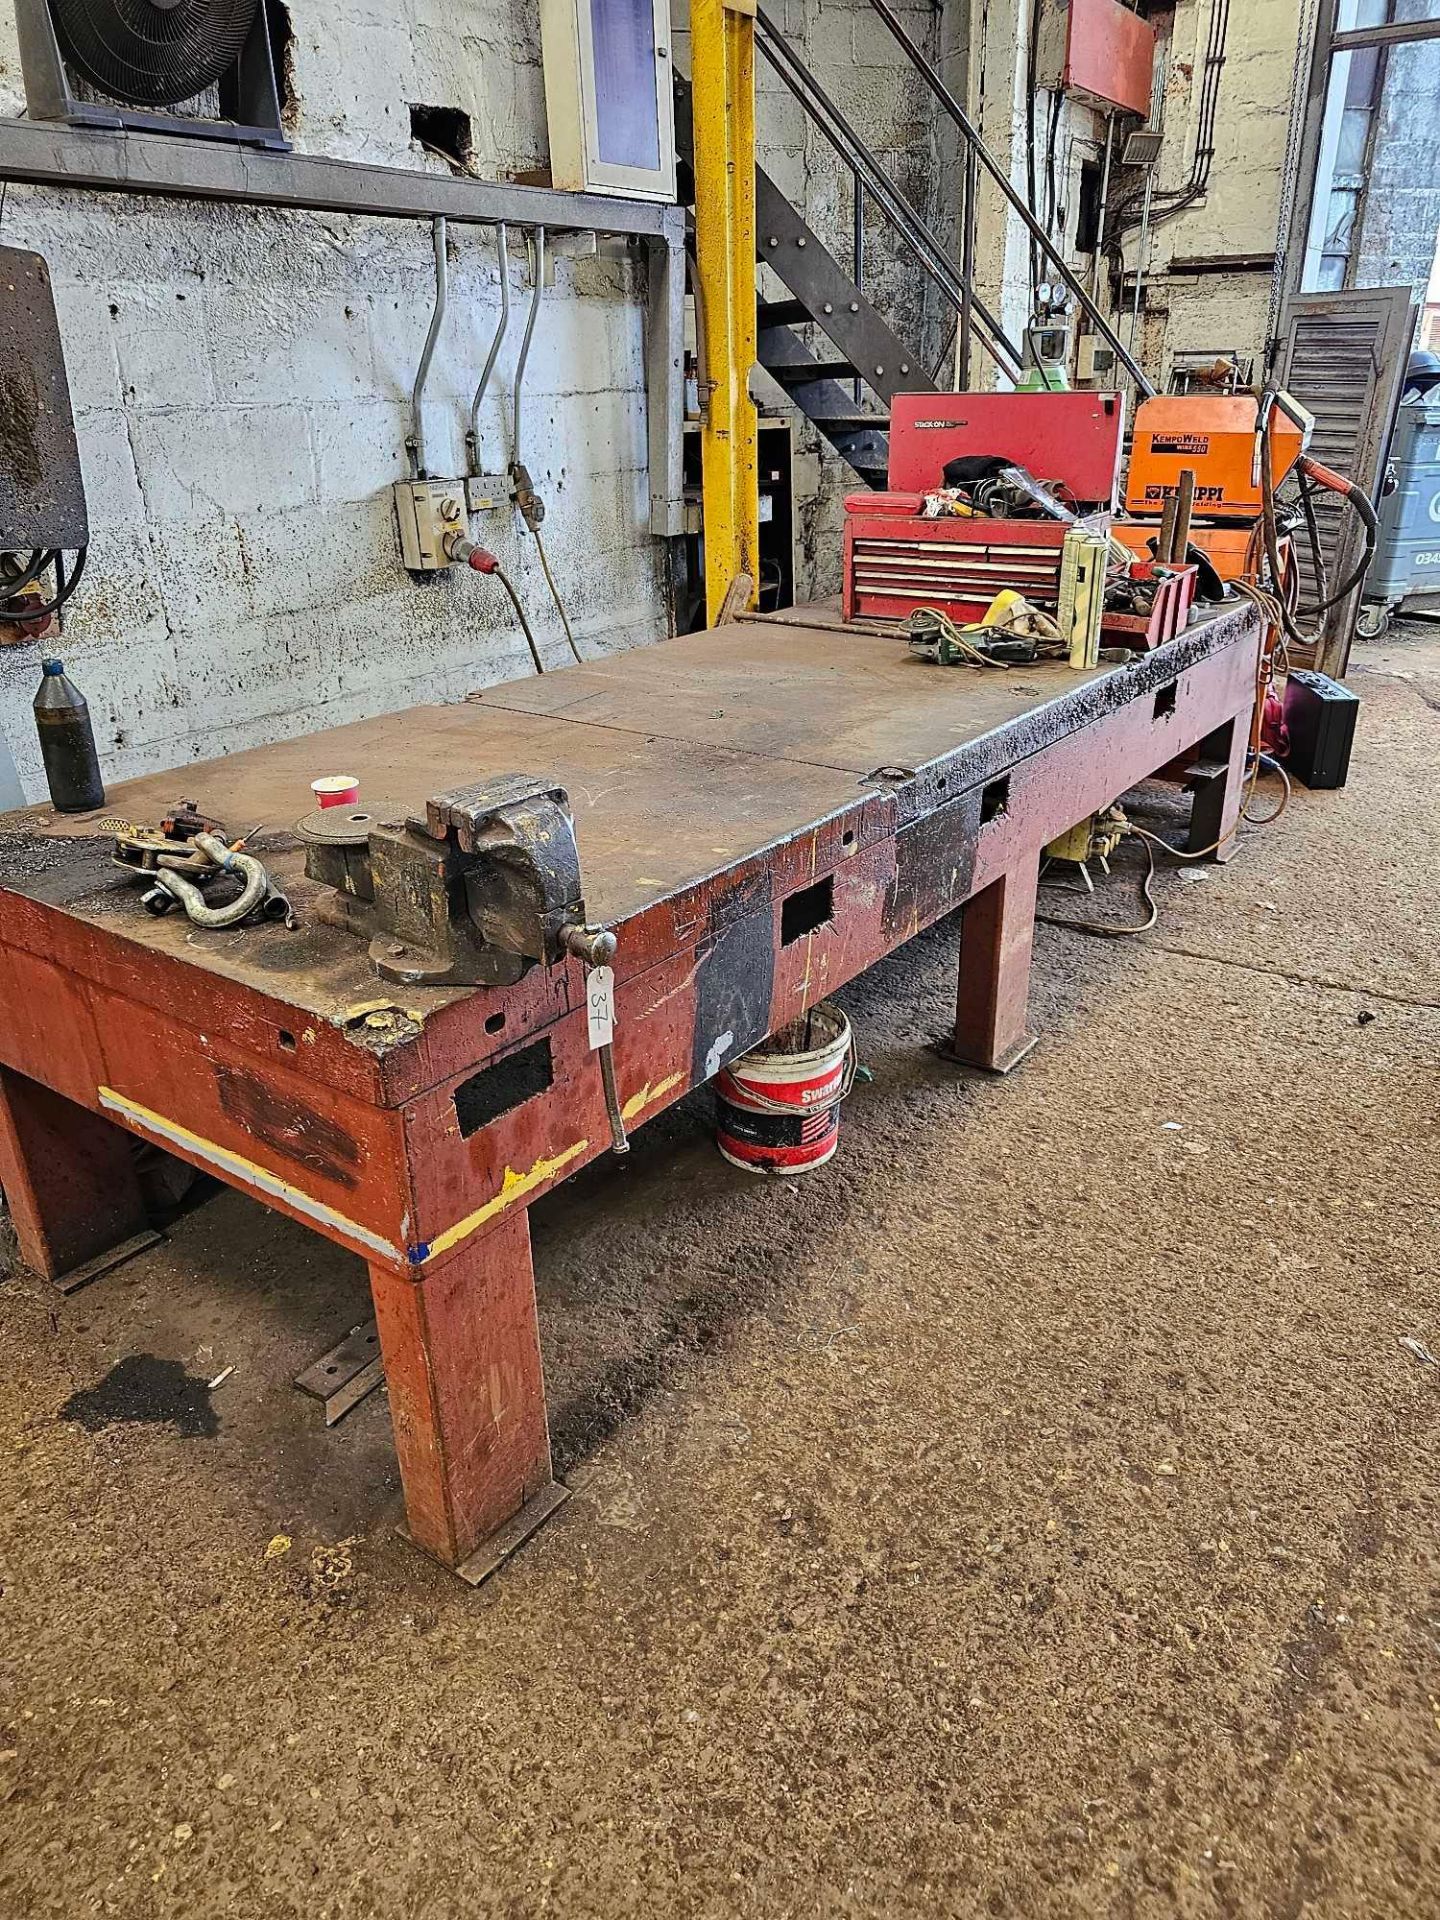 Cast Steel Engineers Marking Out Work Bench 370 x 125 x 88cm Weight 2000kg - Image 2 of 4